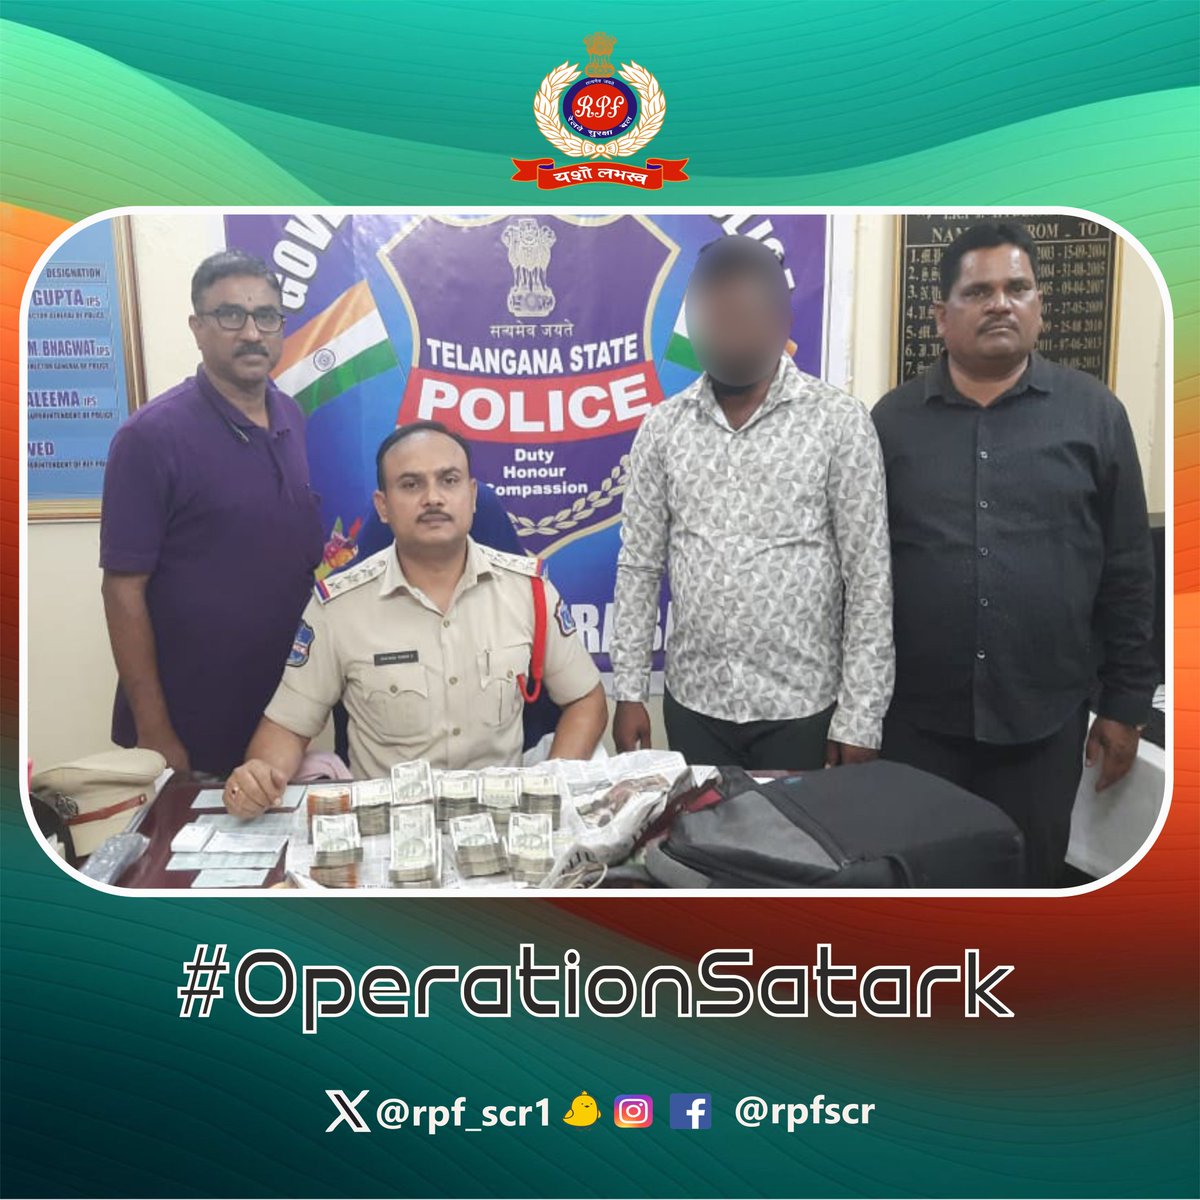 Ensuring transparency & accountability, #RPF & #GRP #Hyderabad jointly intercepted a person in possession of 9.00 lakh cash, lacking proper documentation. Handed over to District Grievance Committee for legal action. #OperationSatark @RPF_INDIA @rpfscr_sc @RailMinIndia